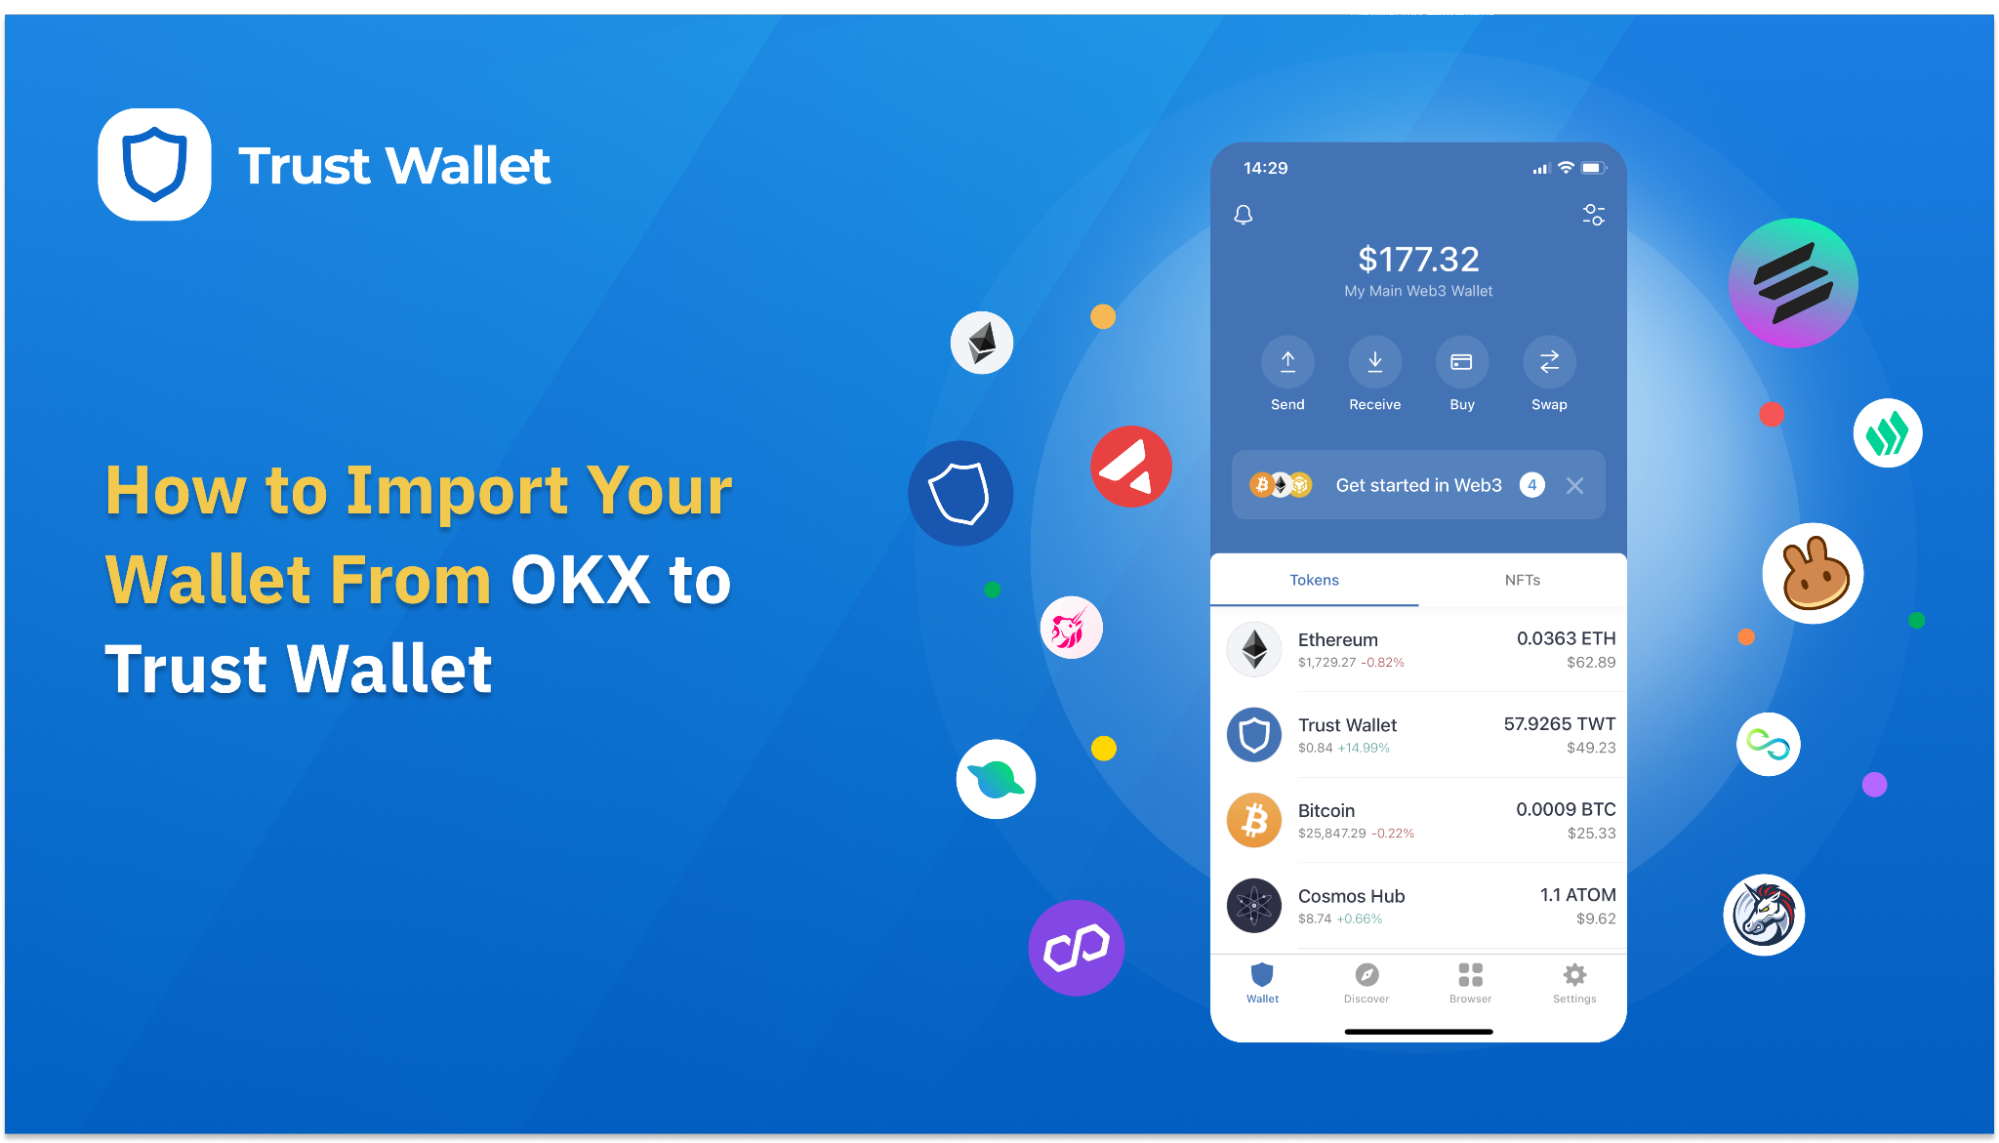 How to Import Your Wallet From OKX Wallet to Trust Wallet